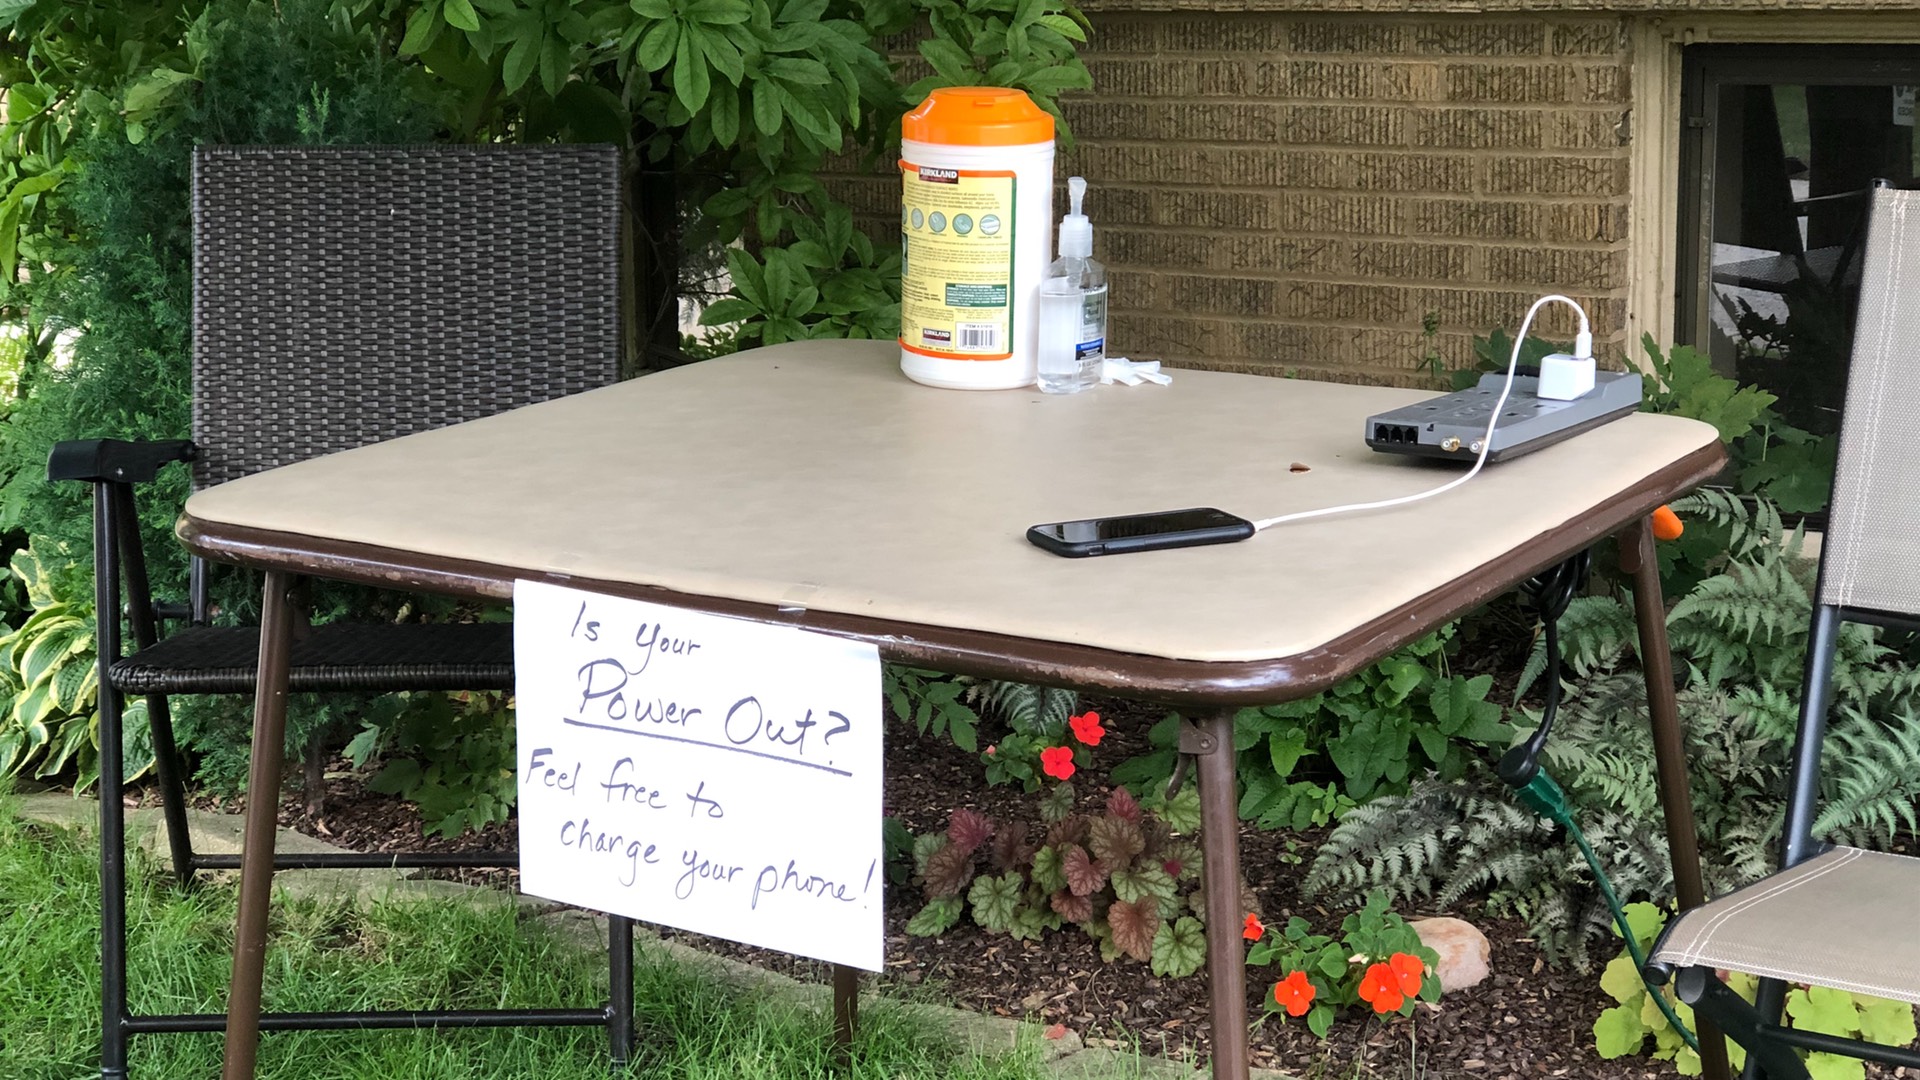 A makeshift charging station in Lincoln Square. (Patty Wetli / WTTW News)